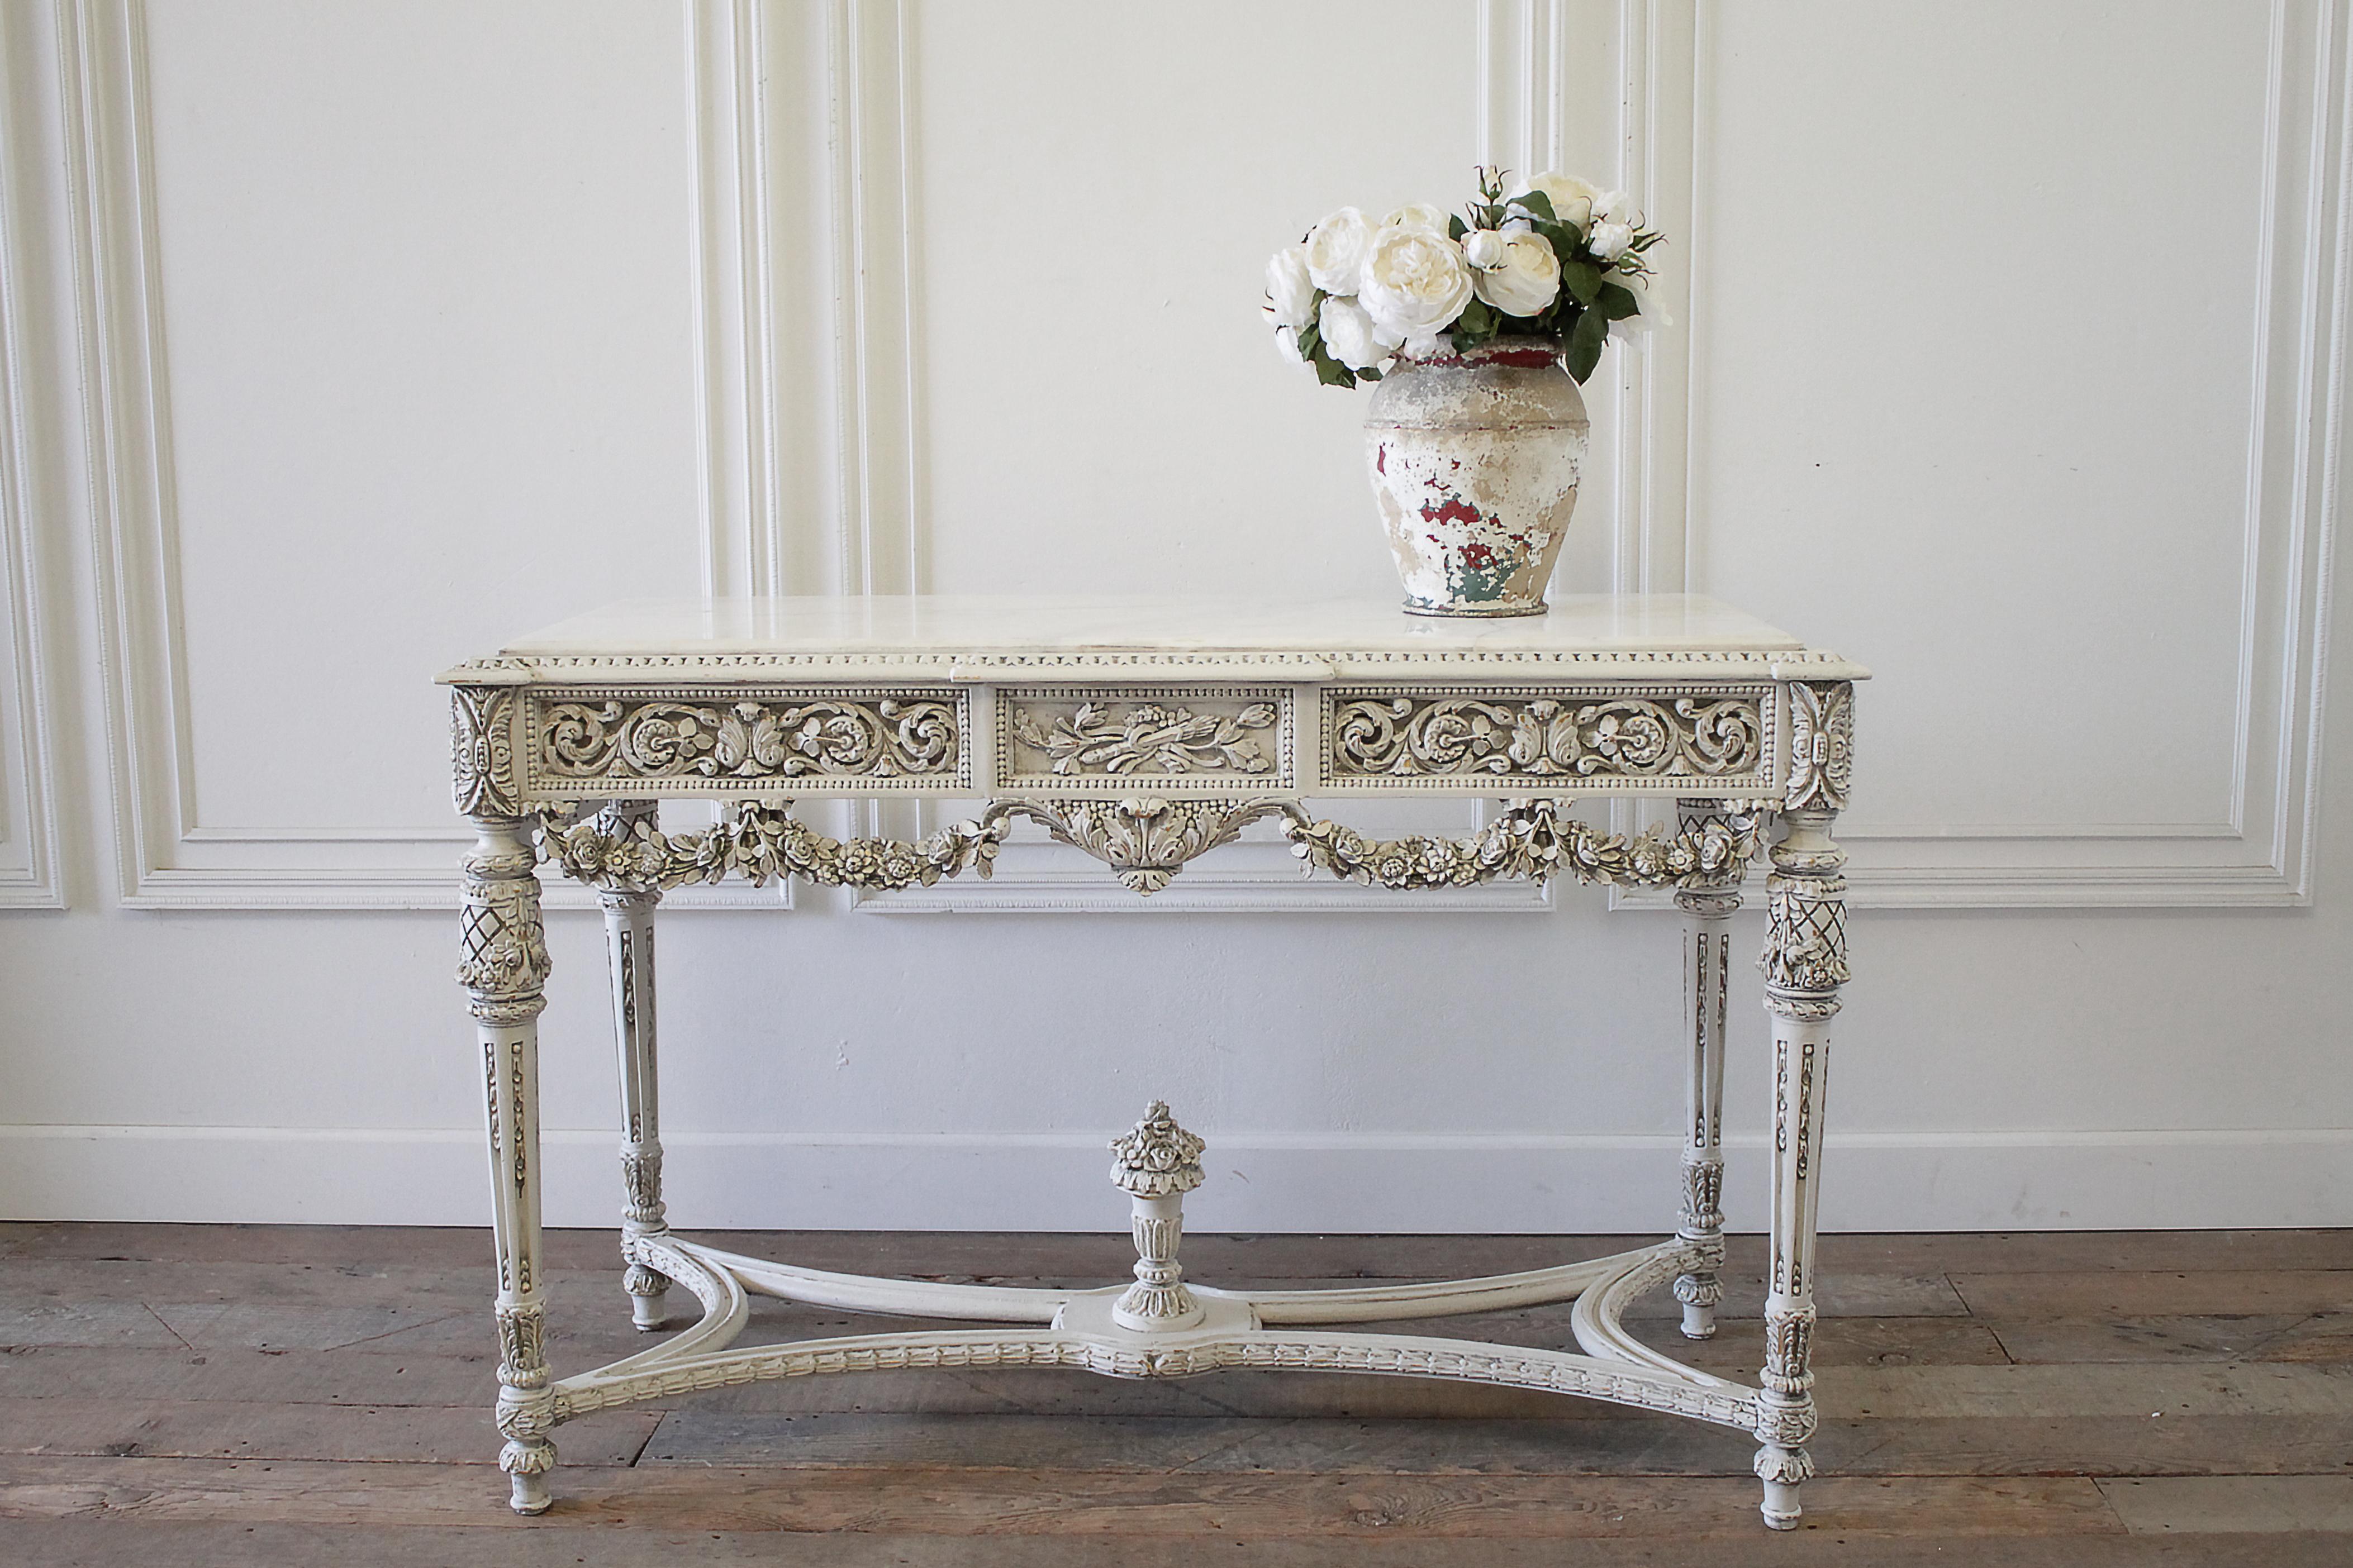 20th century French Louis XVI style carved wood and marble console table
Painted in our oyster white finish with light subtle distressed edges, and antique glazed patina.
Beautiful rose swag carvings, and fluted legs. This table is solid and